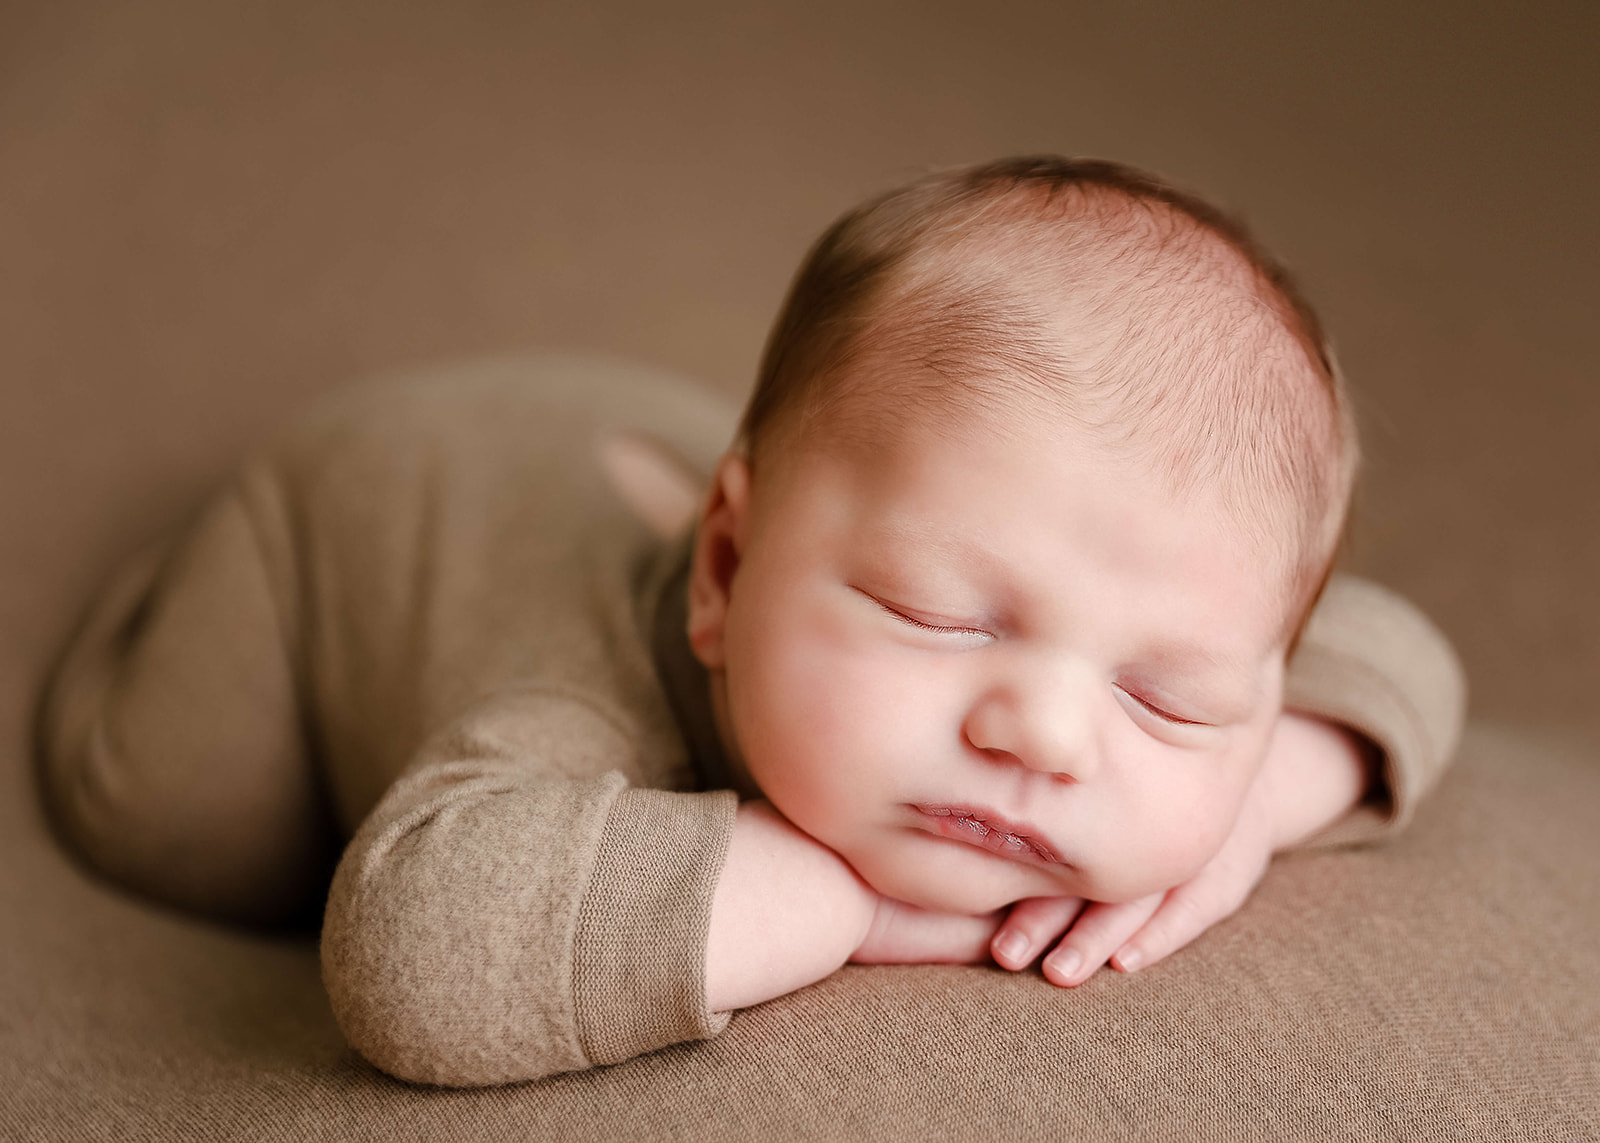 A newborn baby sleeps in a brown onesie with its head resting on its hands Irvine Pediatrician